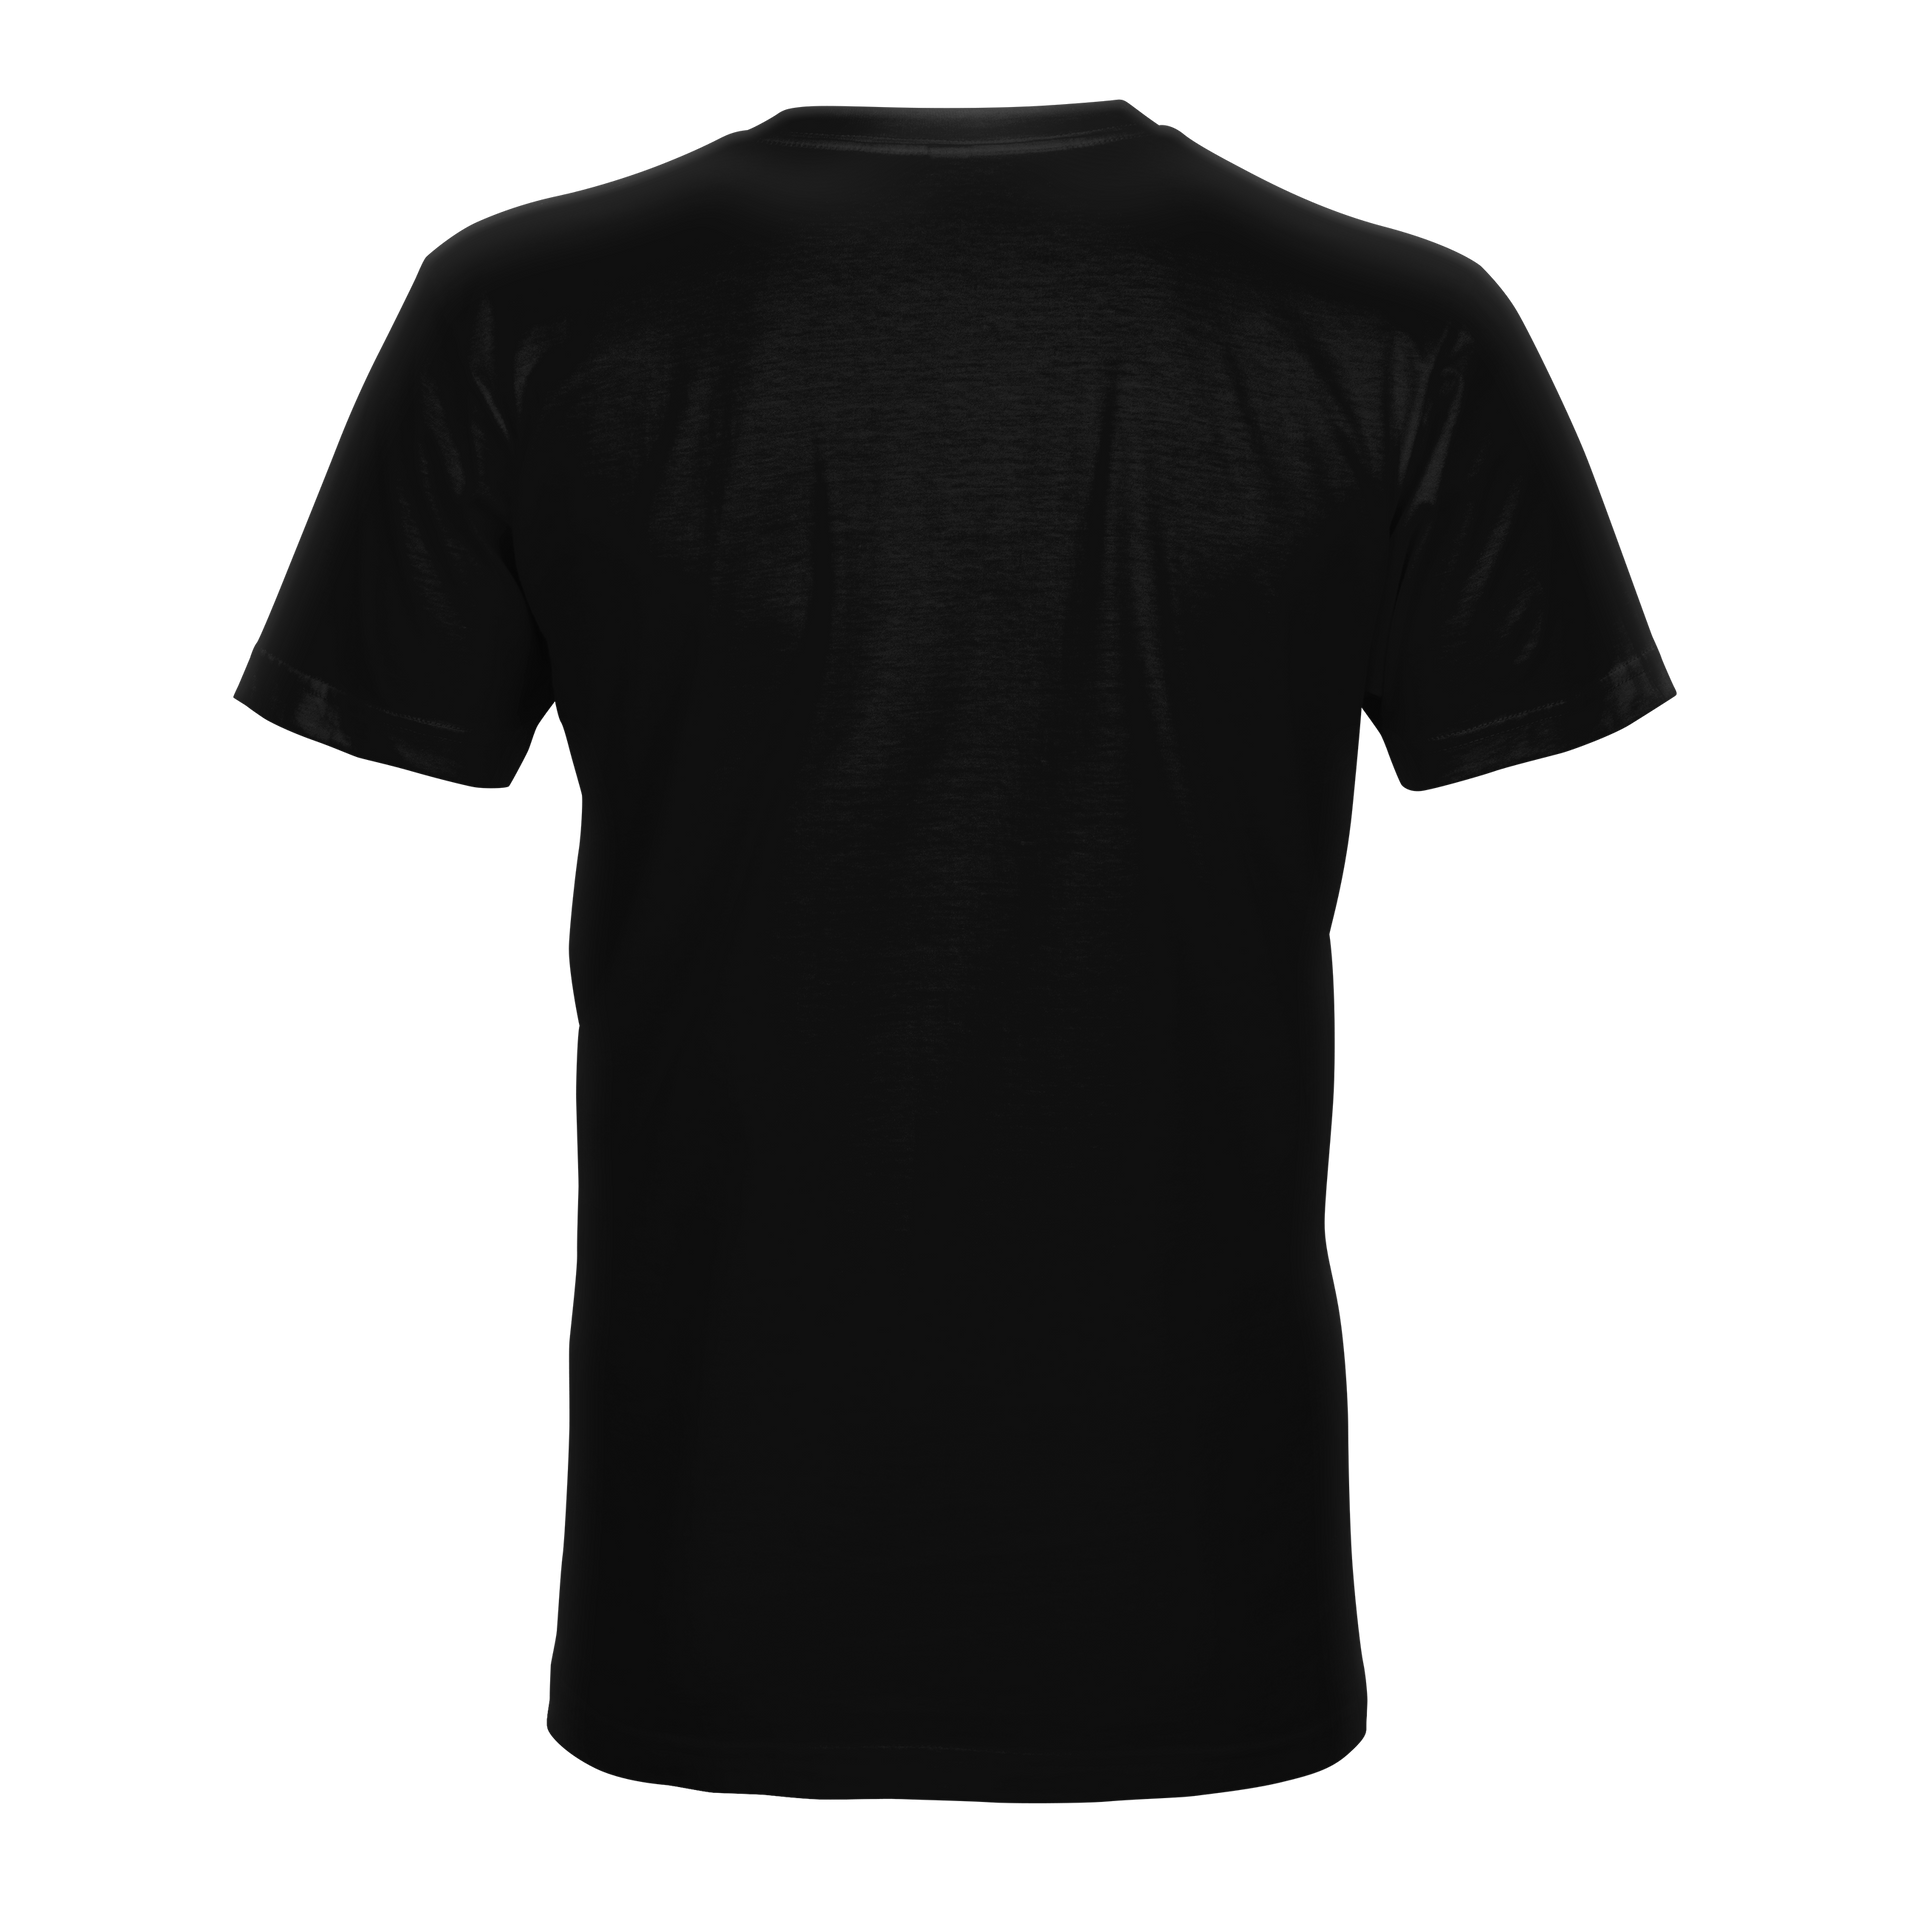 STLHD Men’s Sassy Approved Black Tee - H&H Outfitters